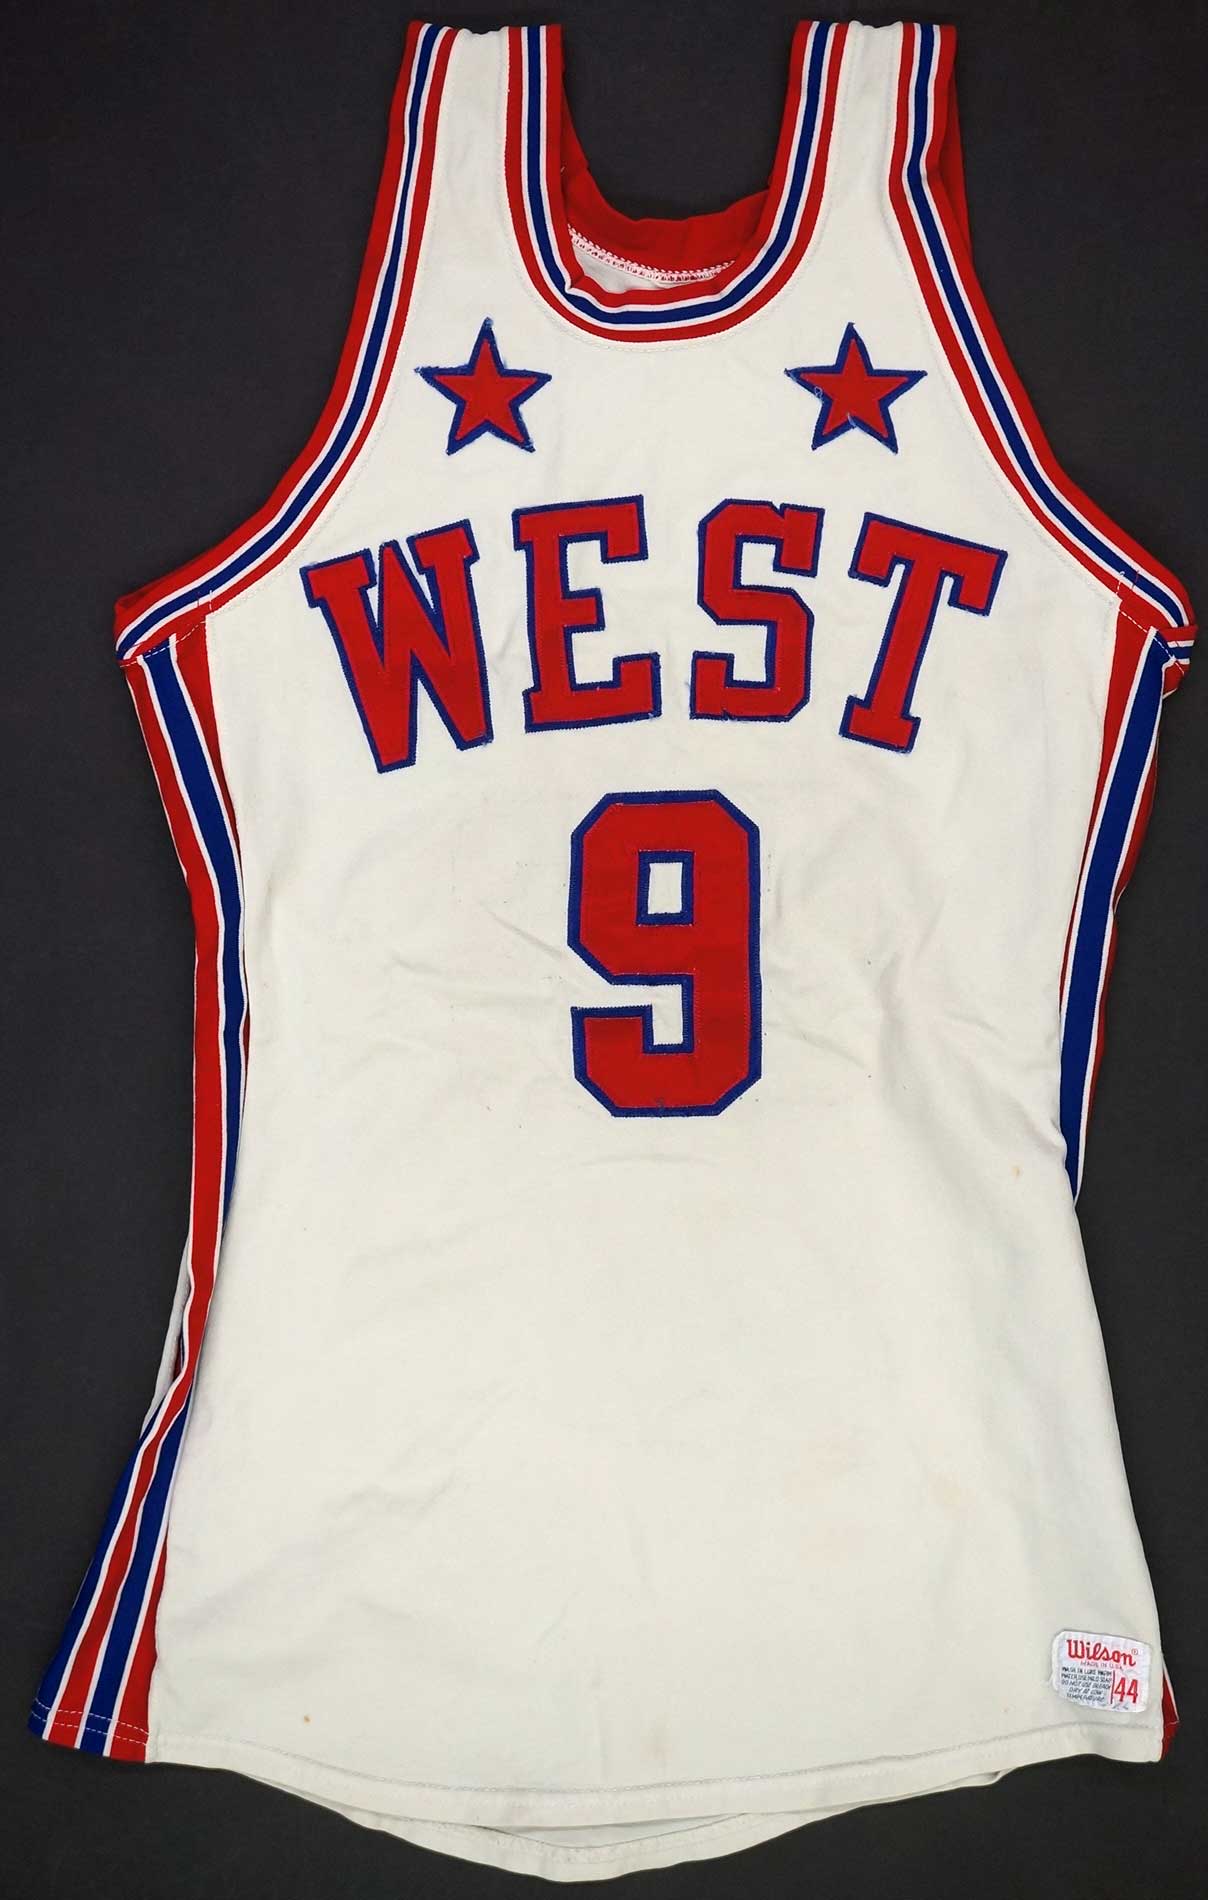 1973 Bob Love Western Conference All-Star Jersey